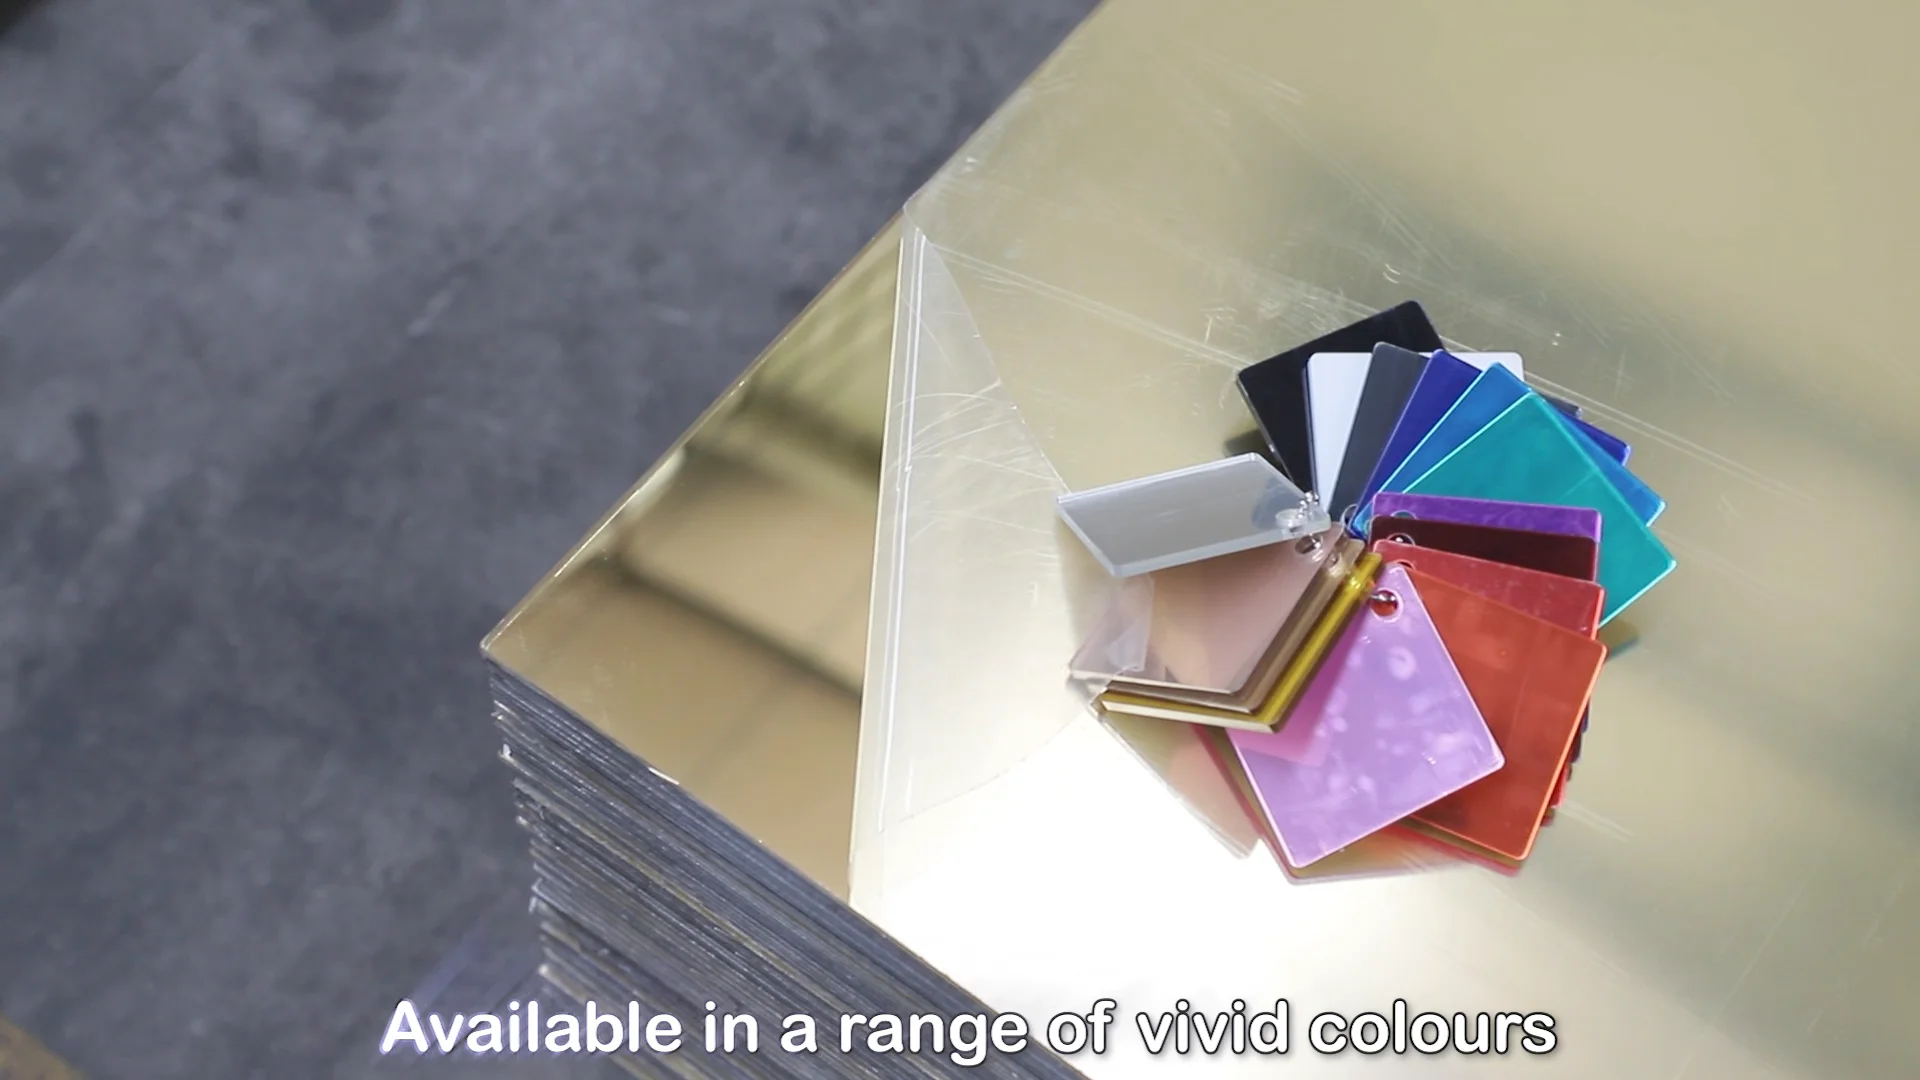 Large 3mm Acrylic Mirror Custom Cut To Size Colorful One Way Two Way Pmma  Mirror from China Manufacturer - Guangdong Donghua